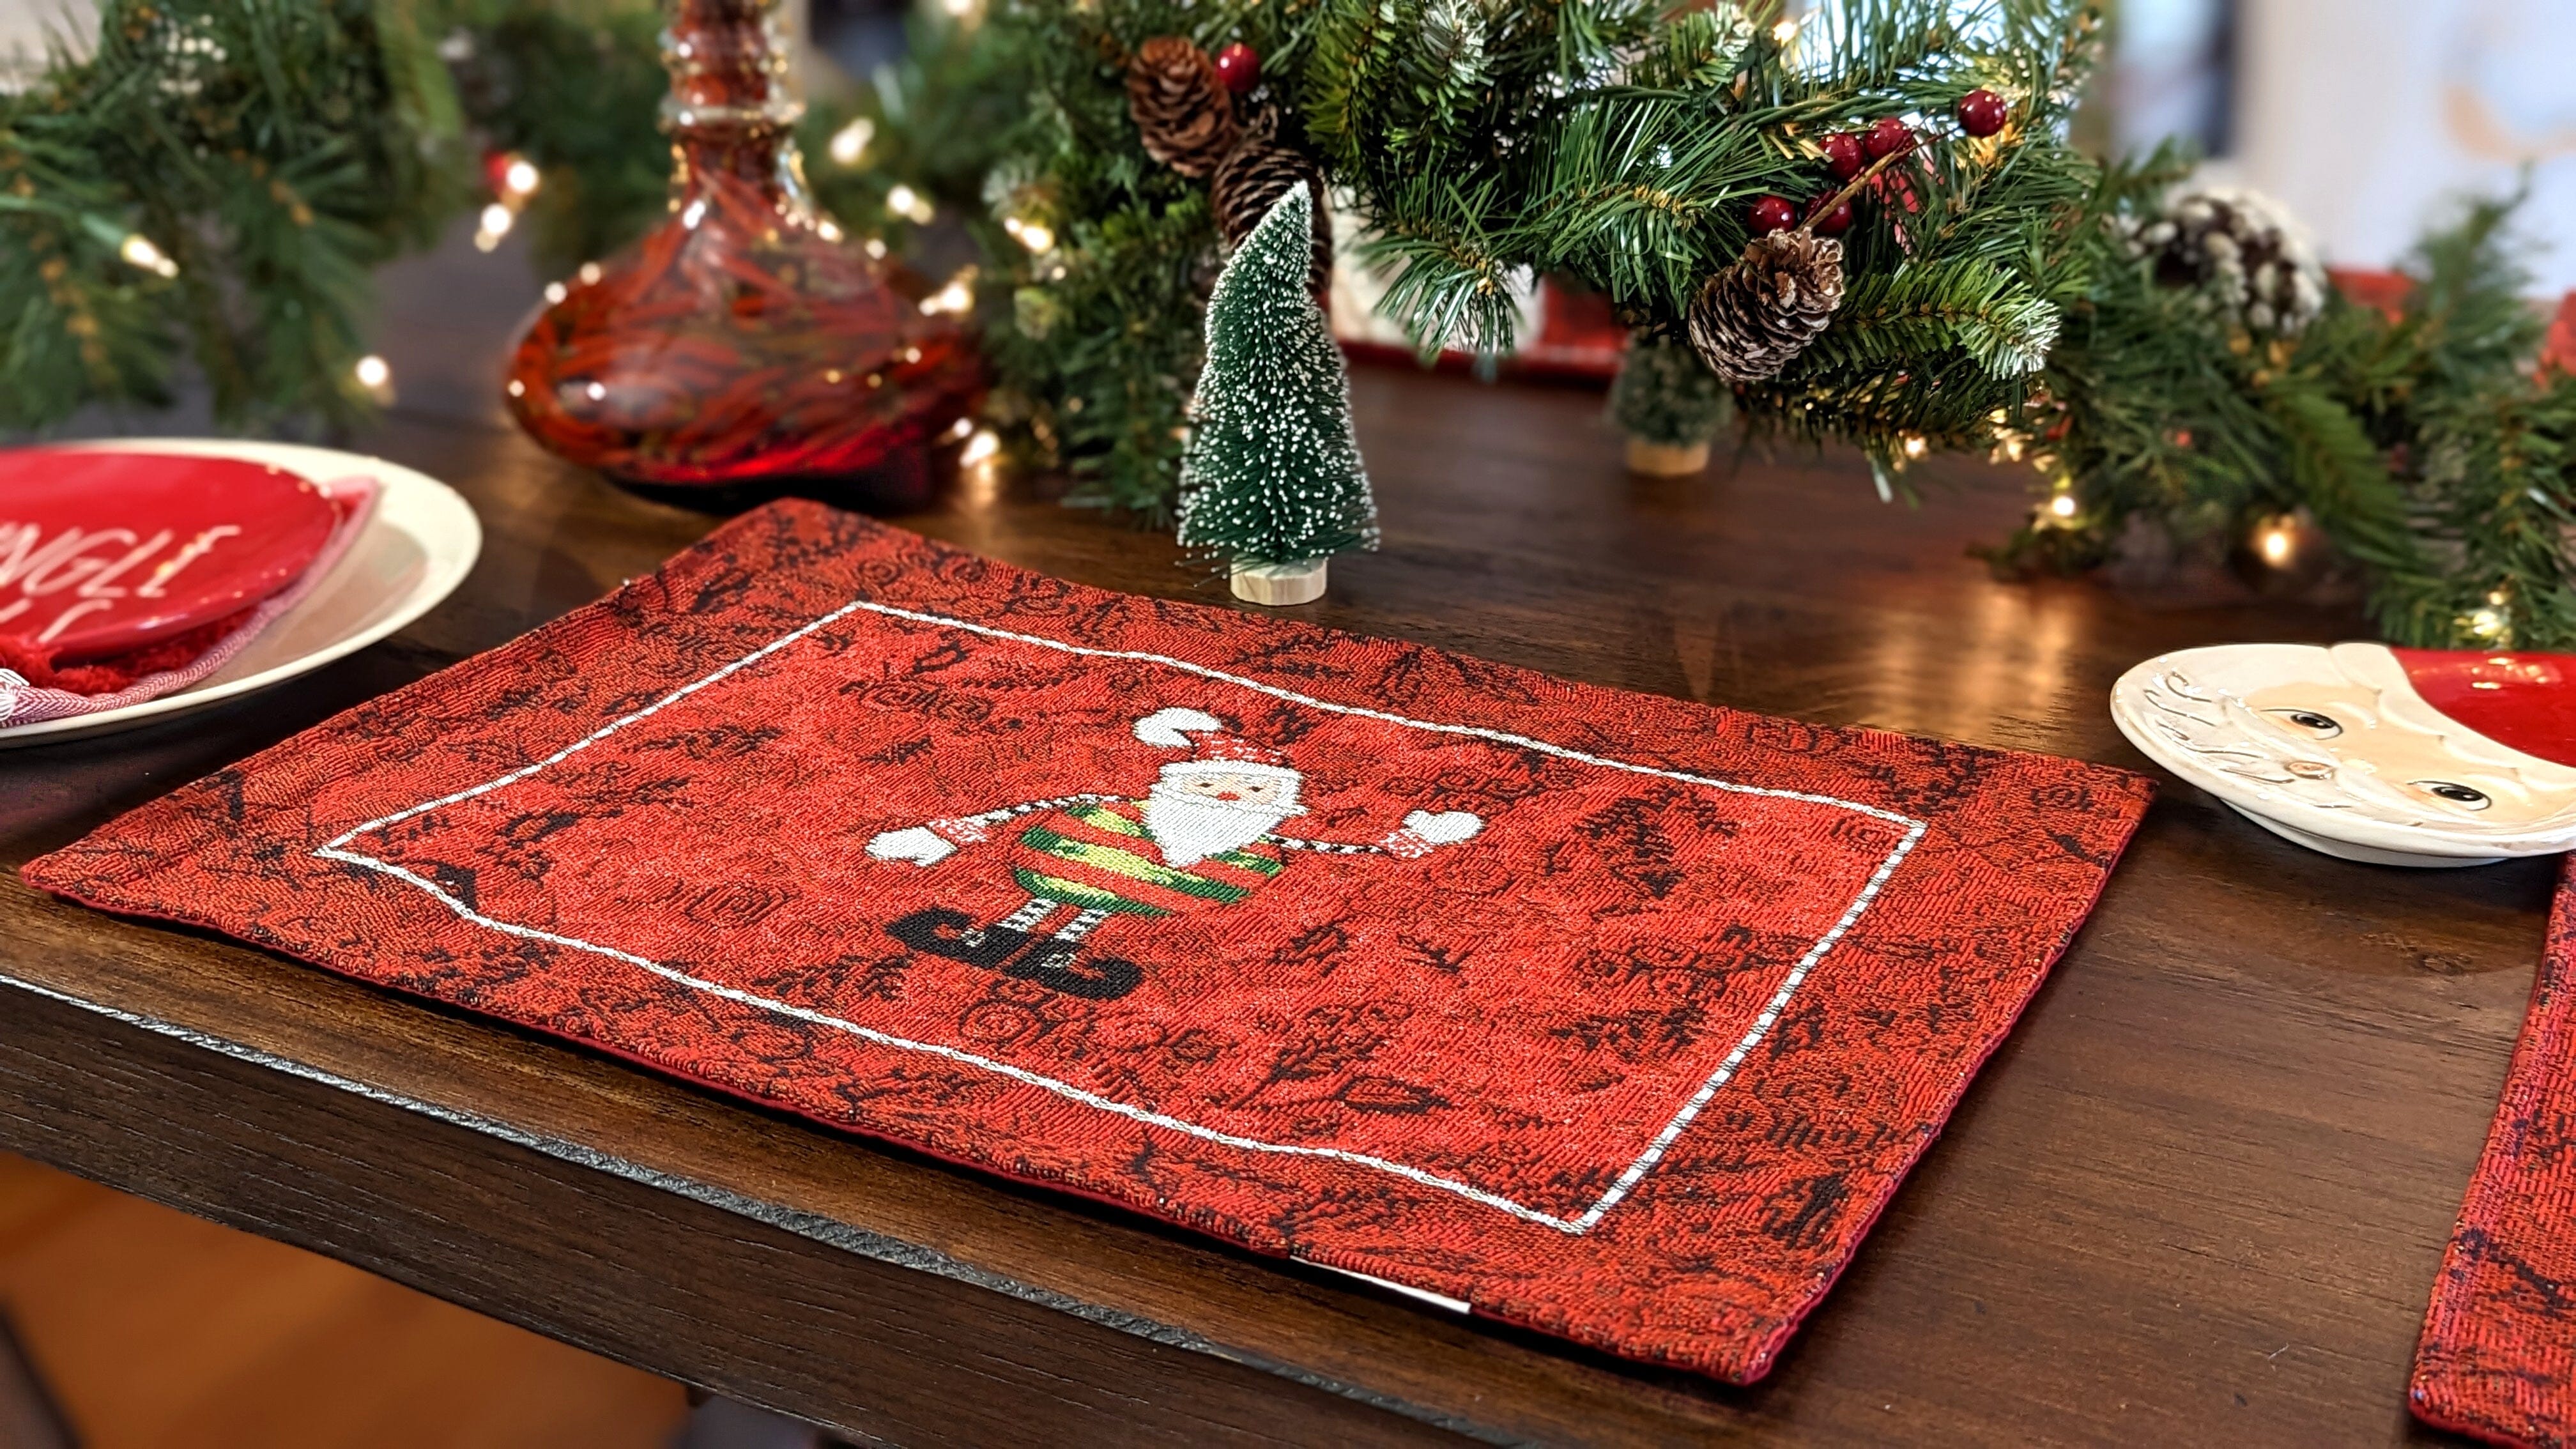 Tache Here Comes Santa Claus Vintage Holiday Woven Tapestry Red Christmas Placemat Set of 4